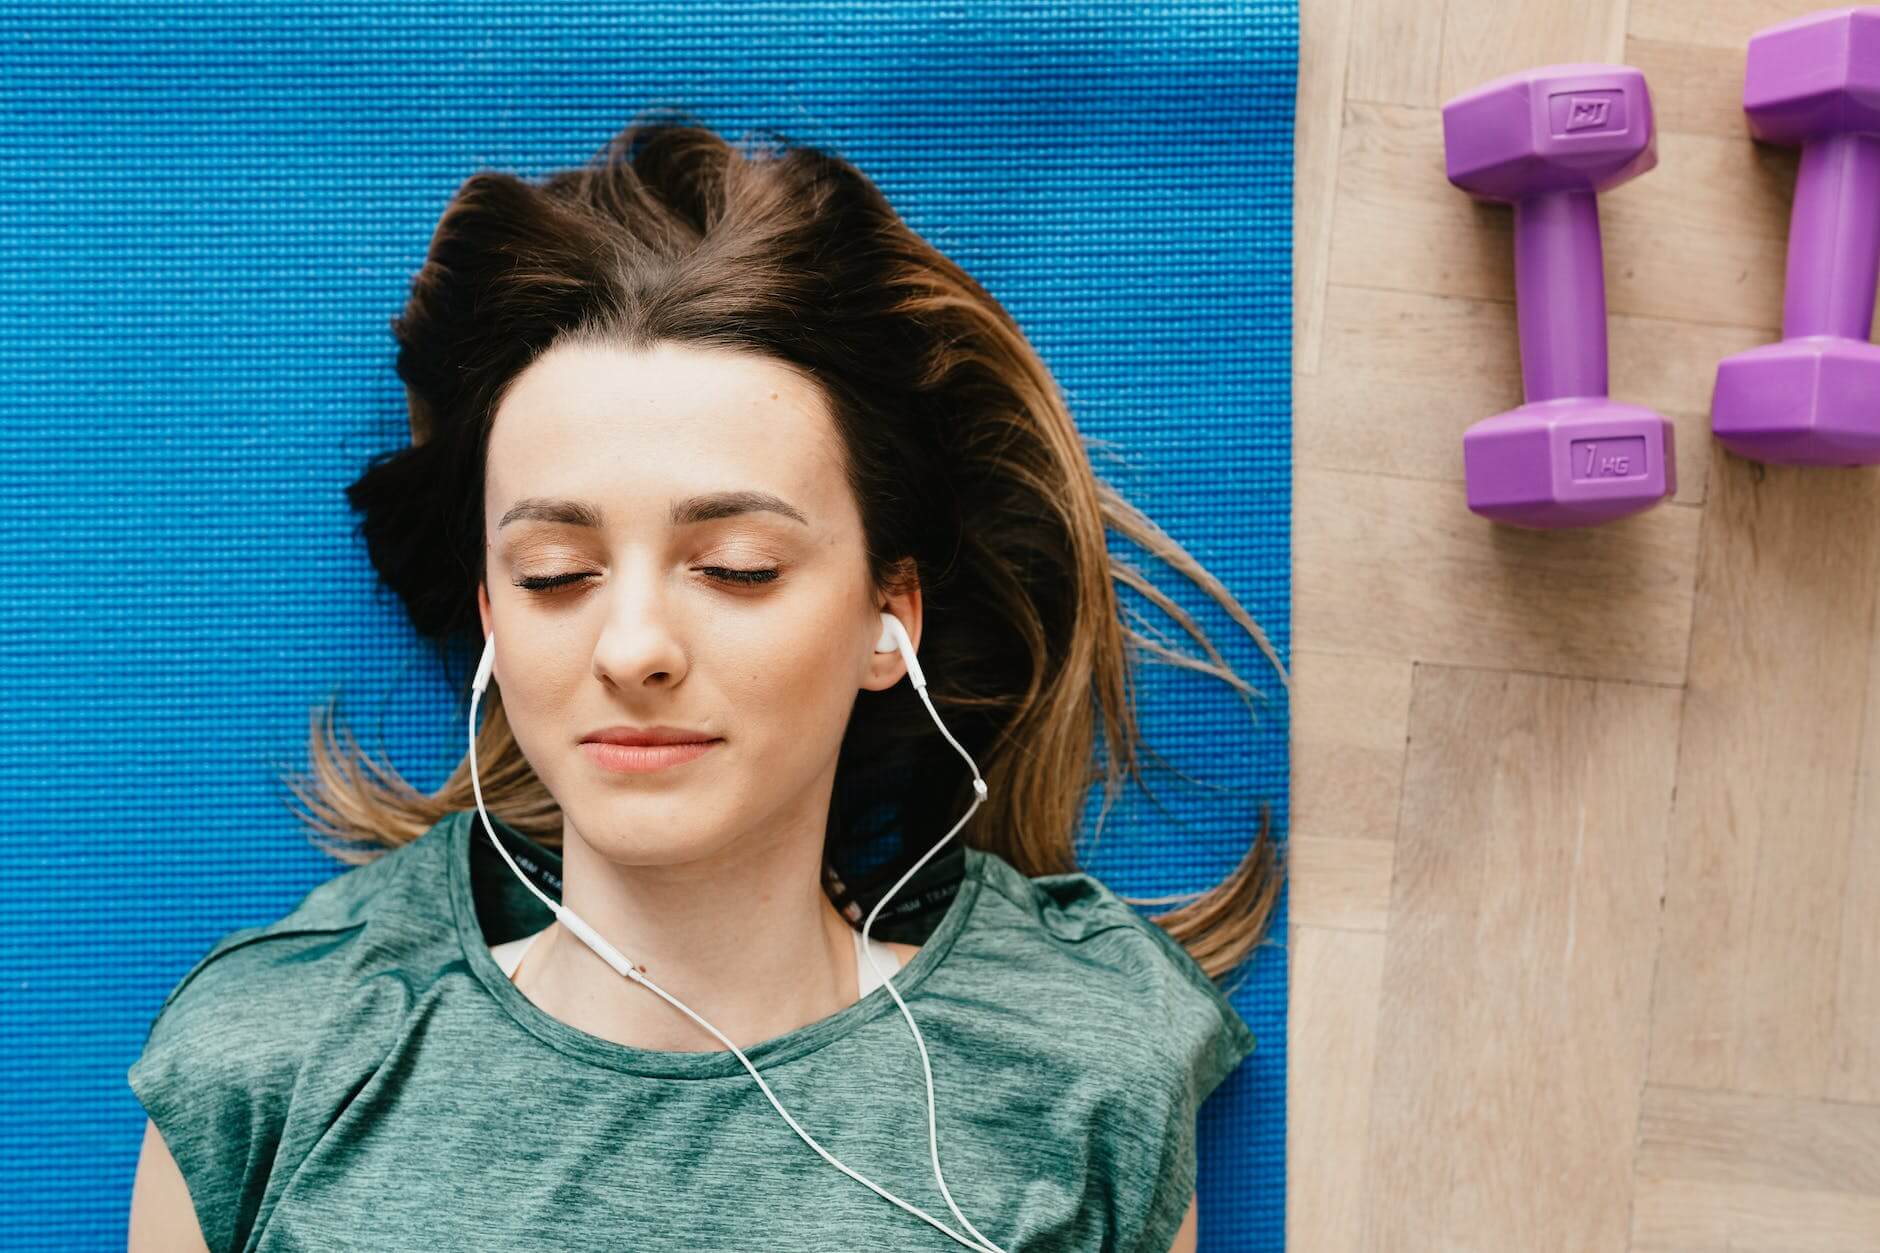 woman listening to music in earphones while resting after home workout